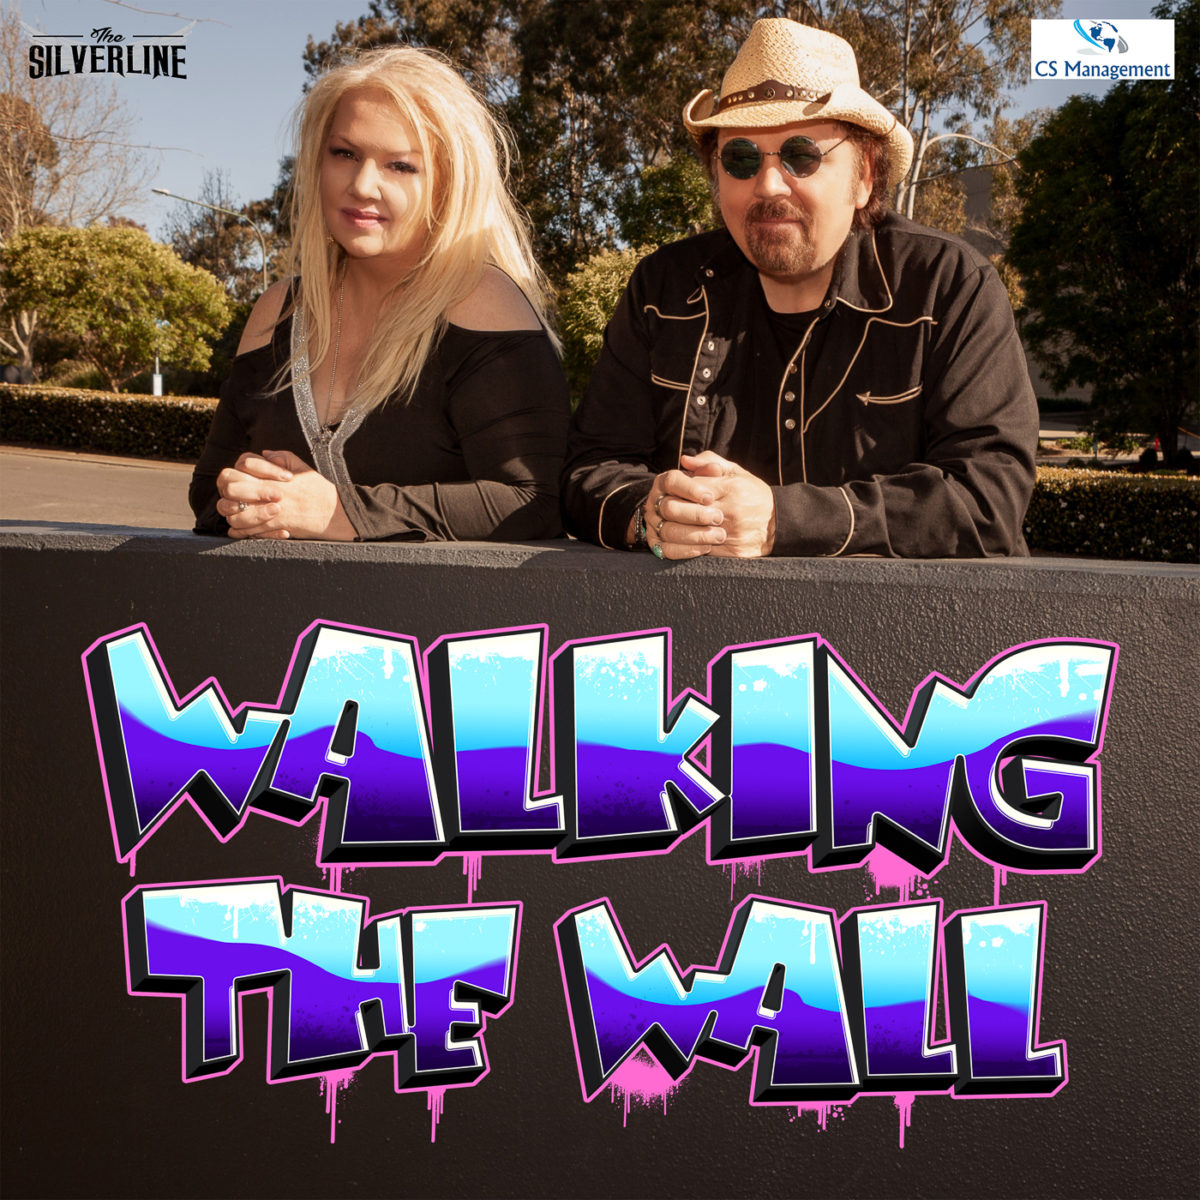 Walking The Wall - The Silverline